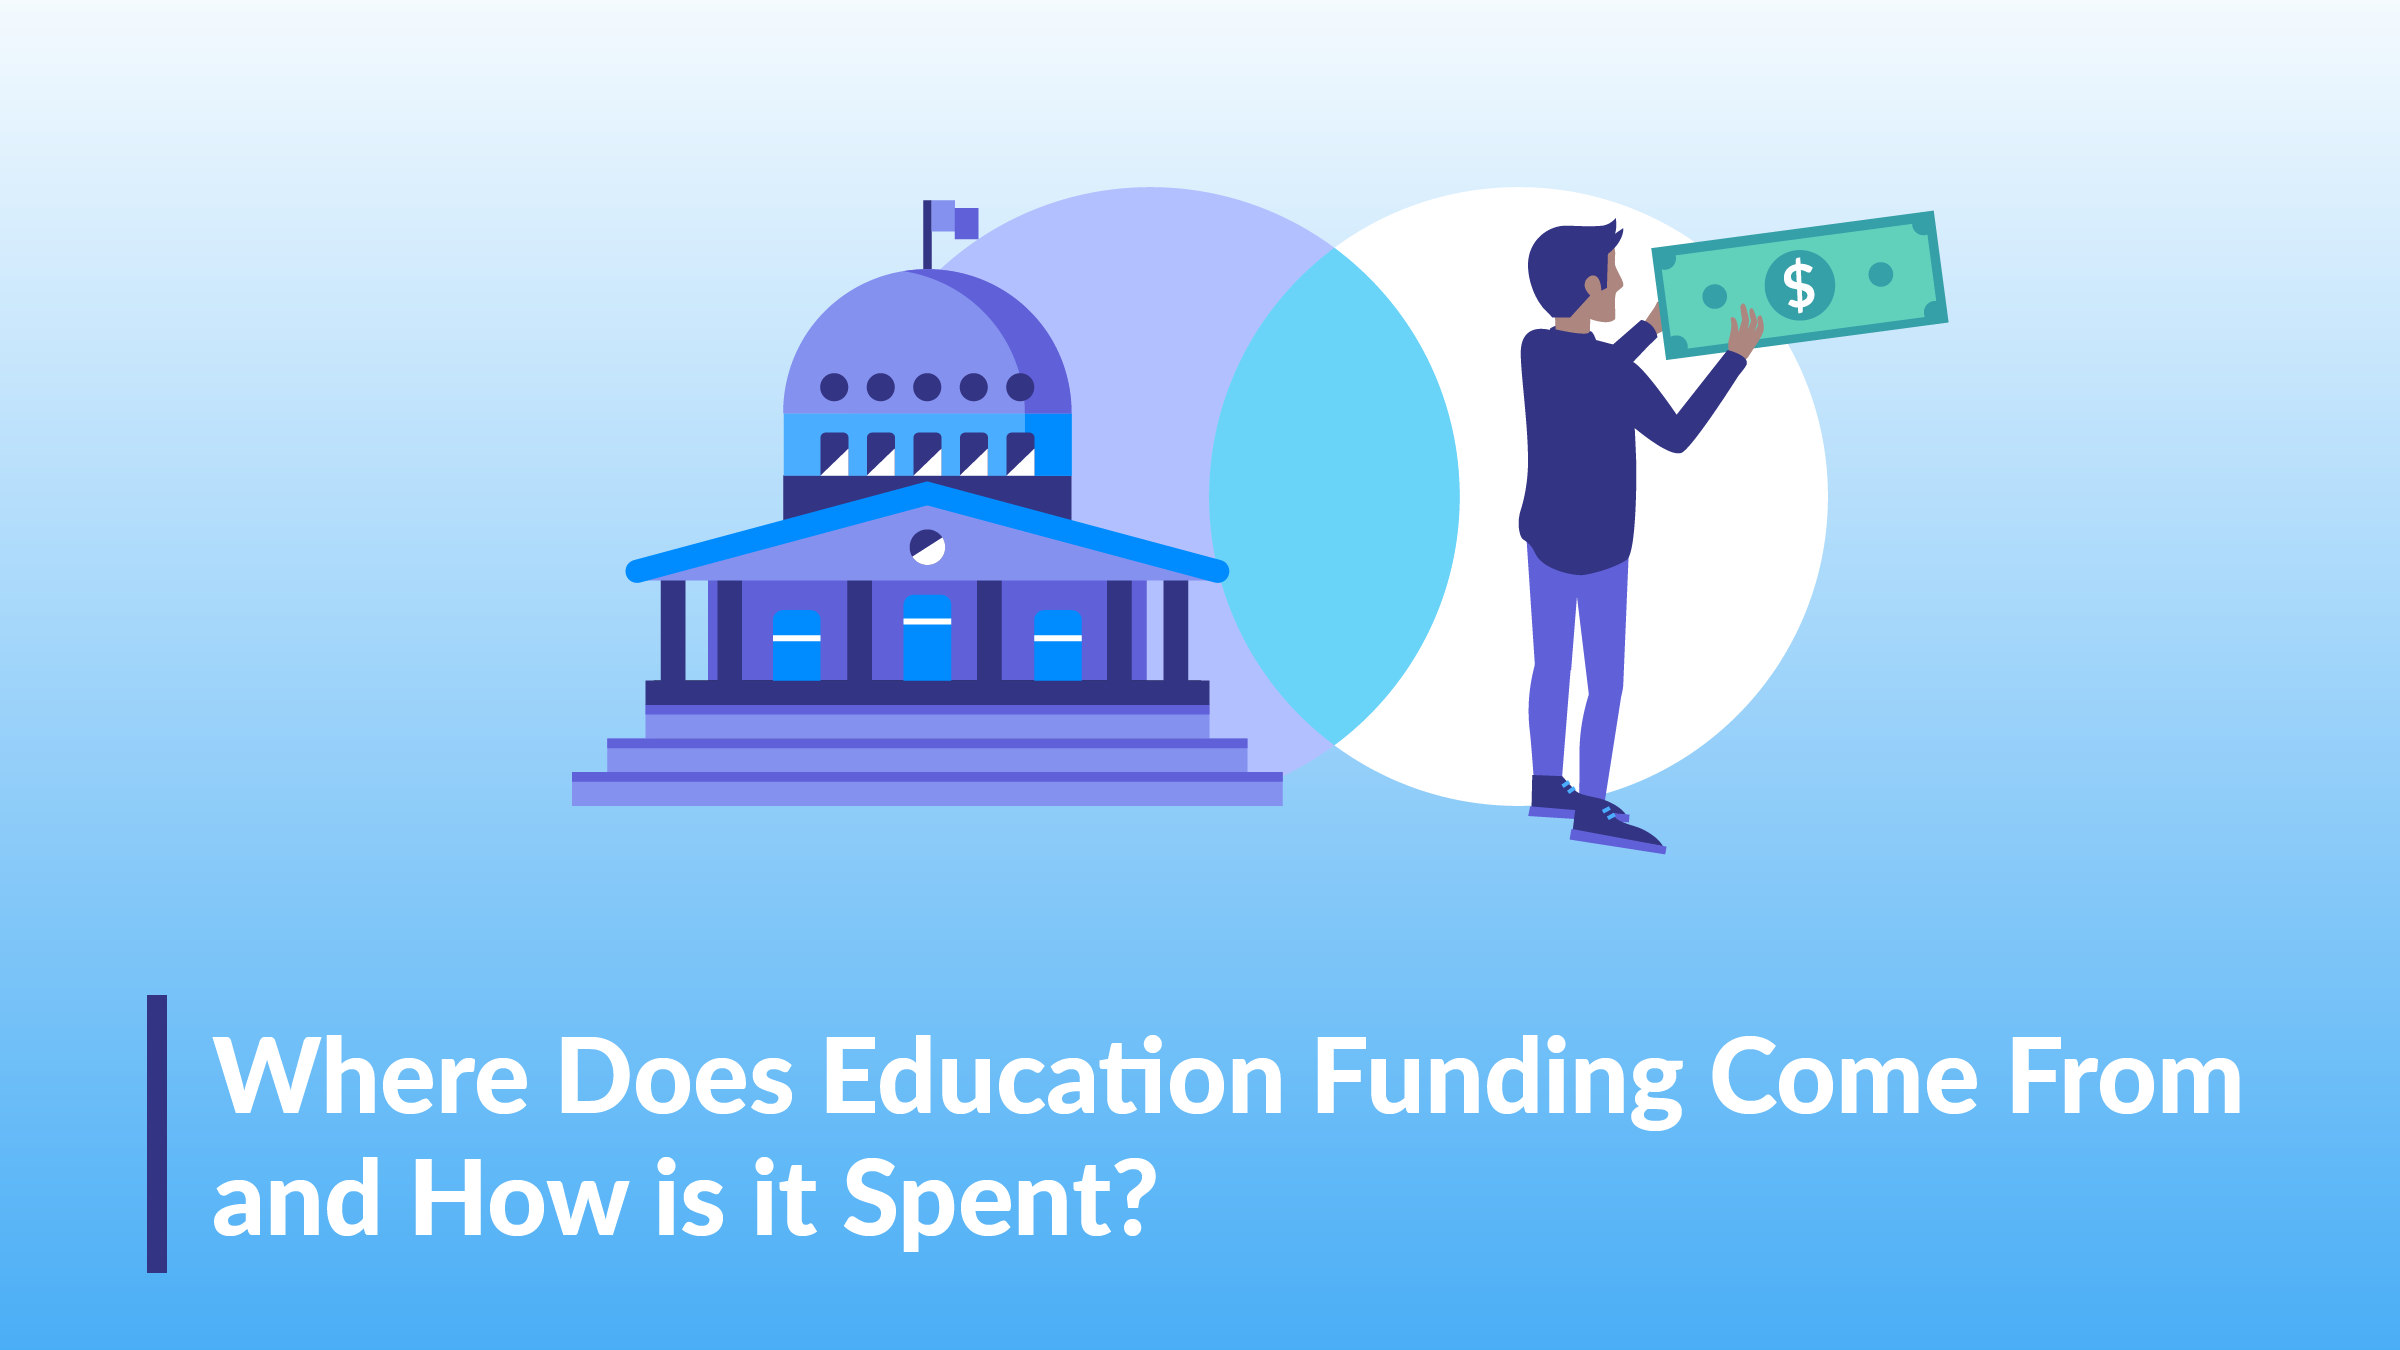 Where Does Education Funding Come From and How Is It Spent?